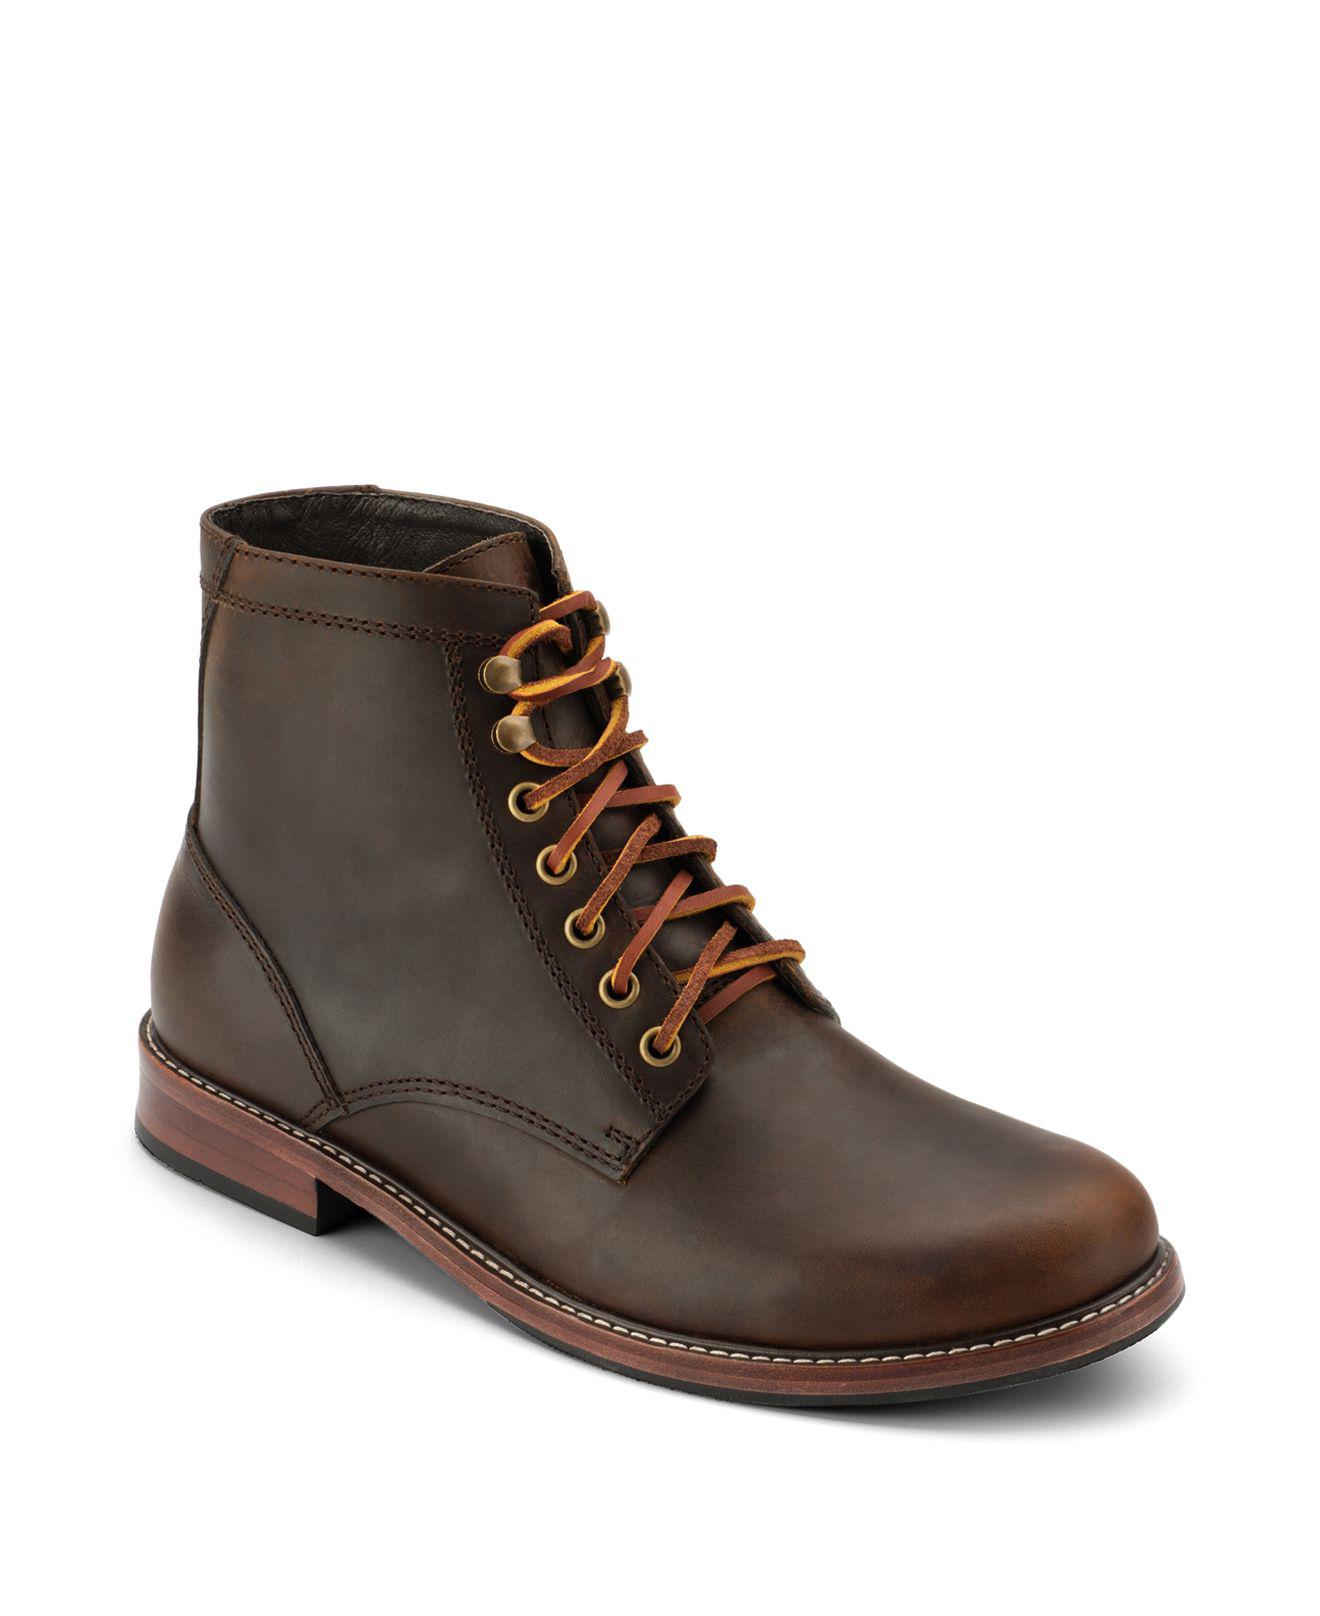 Lyst - Eastland 1955 Edition Elkton Boots in Brown for Men